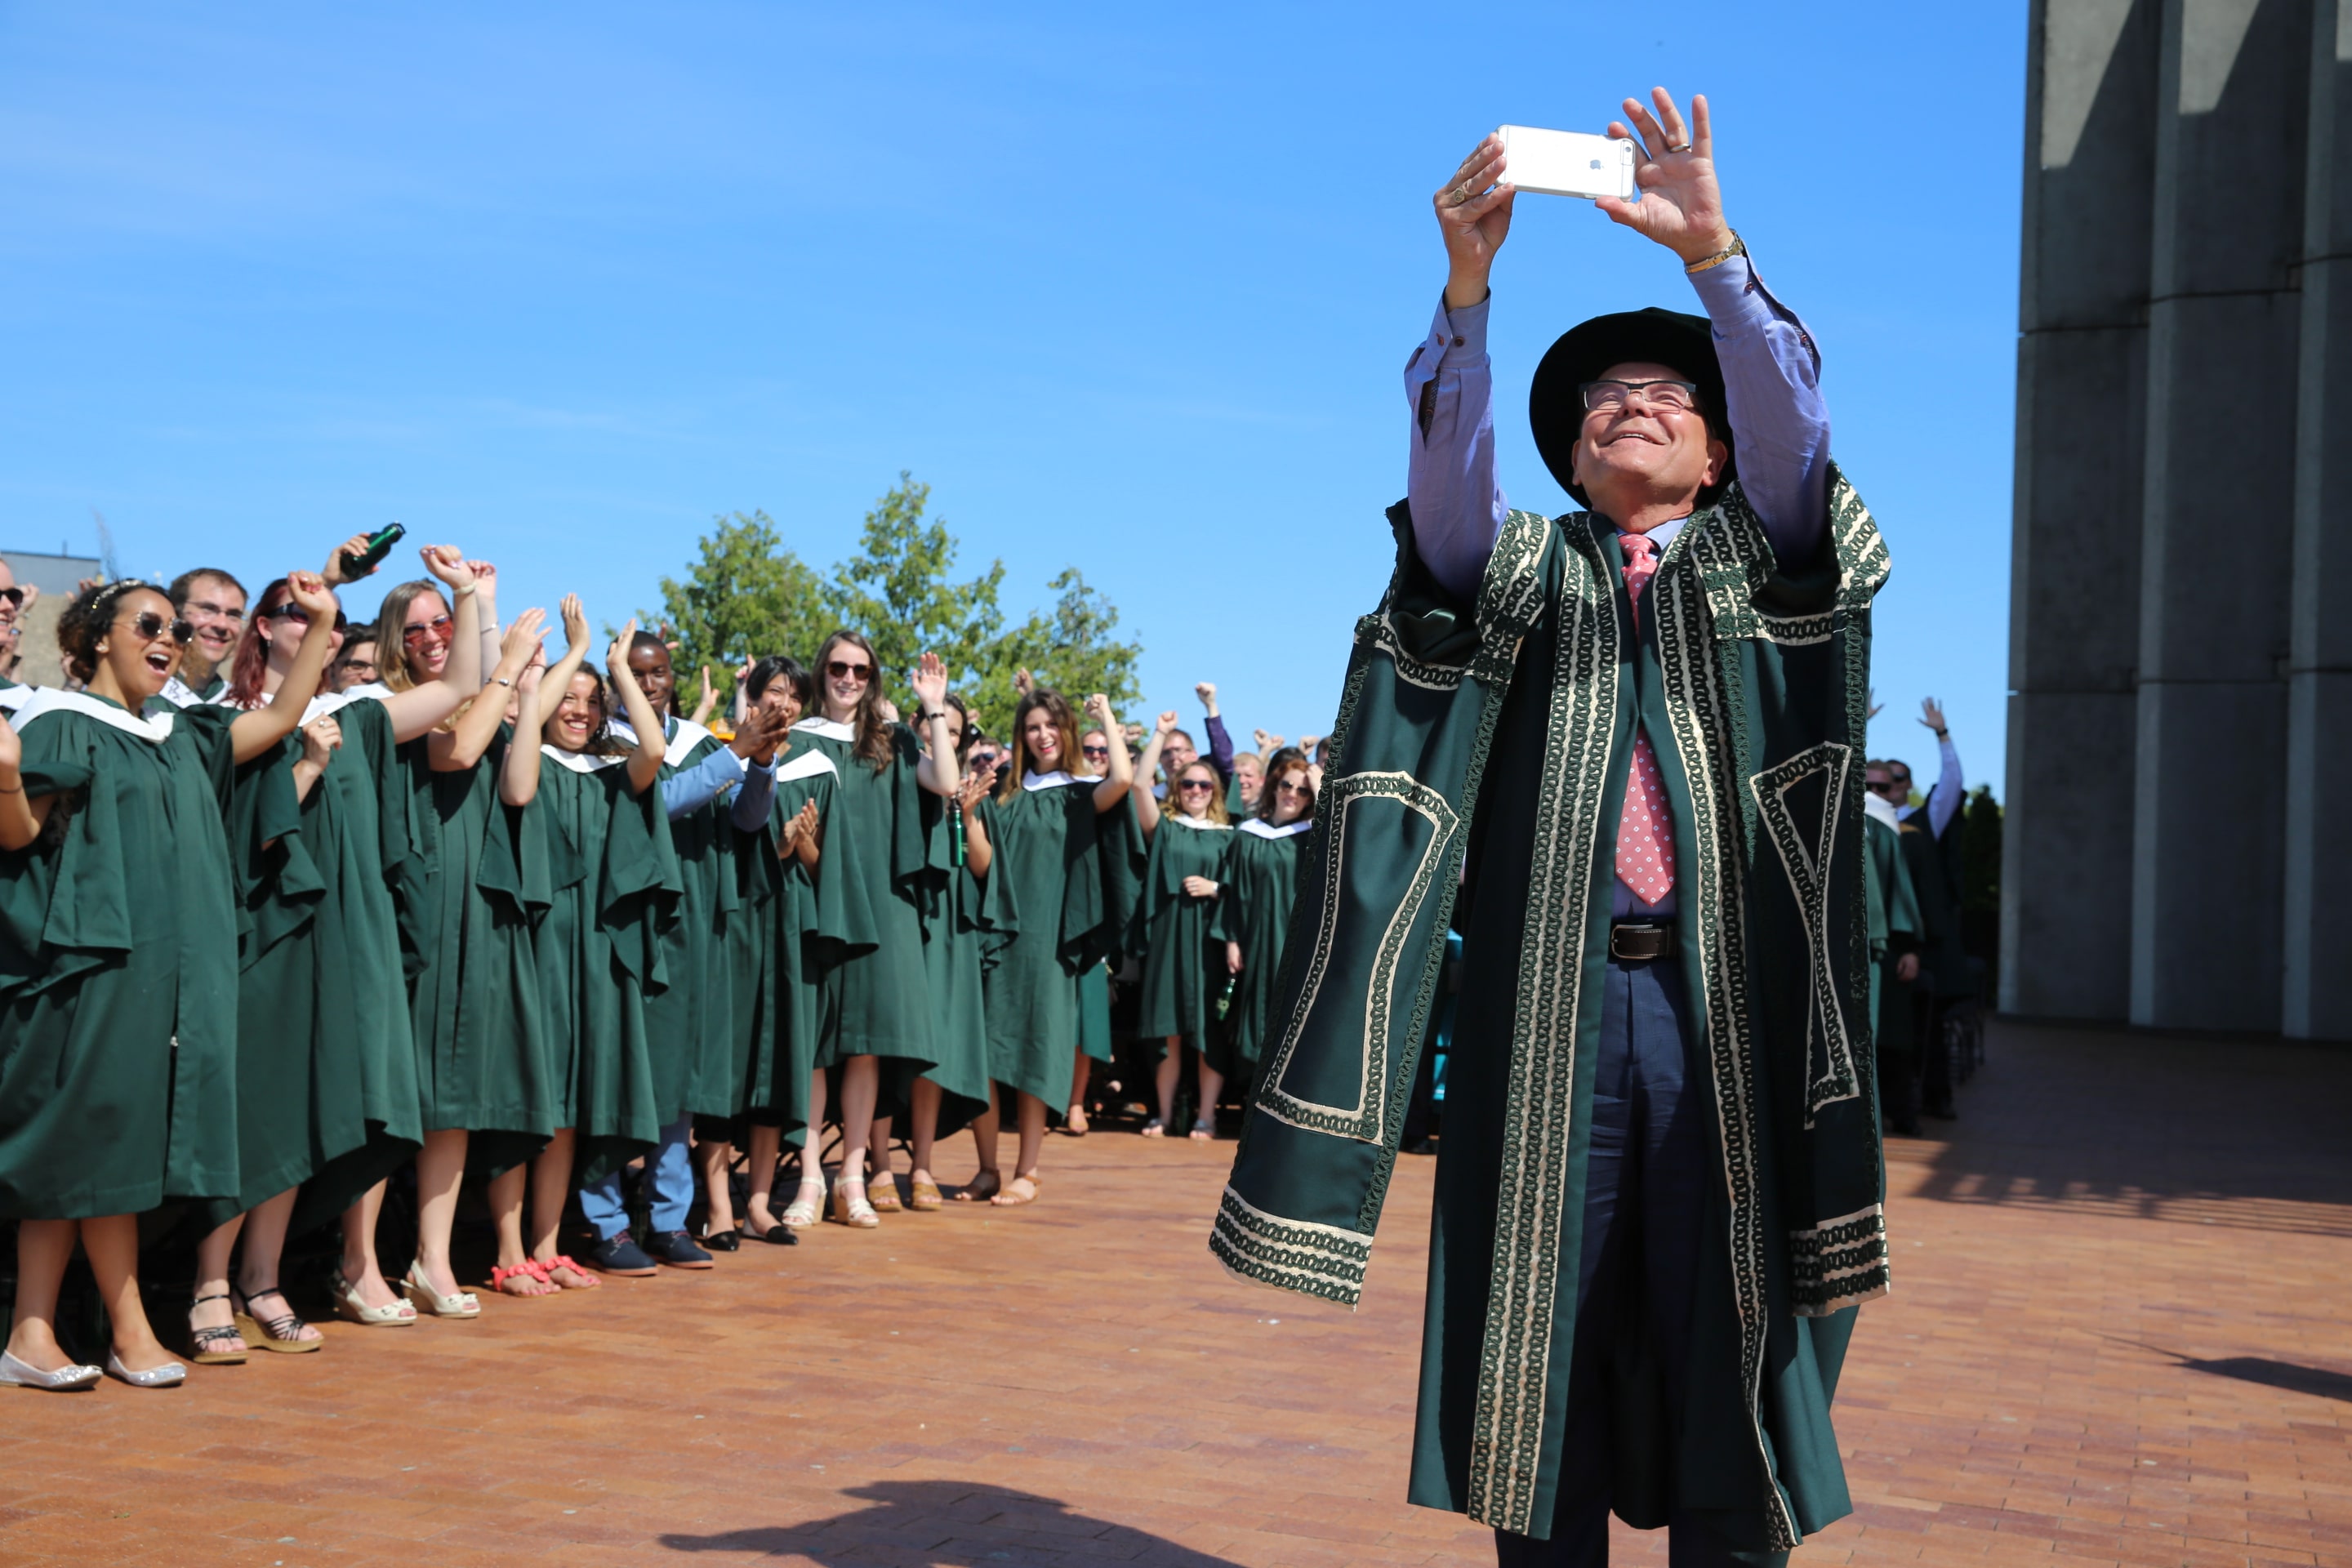 Don Tapscott takes a selfie at convocation